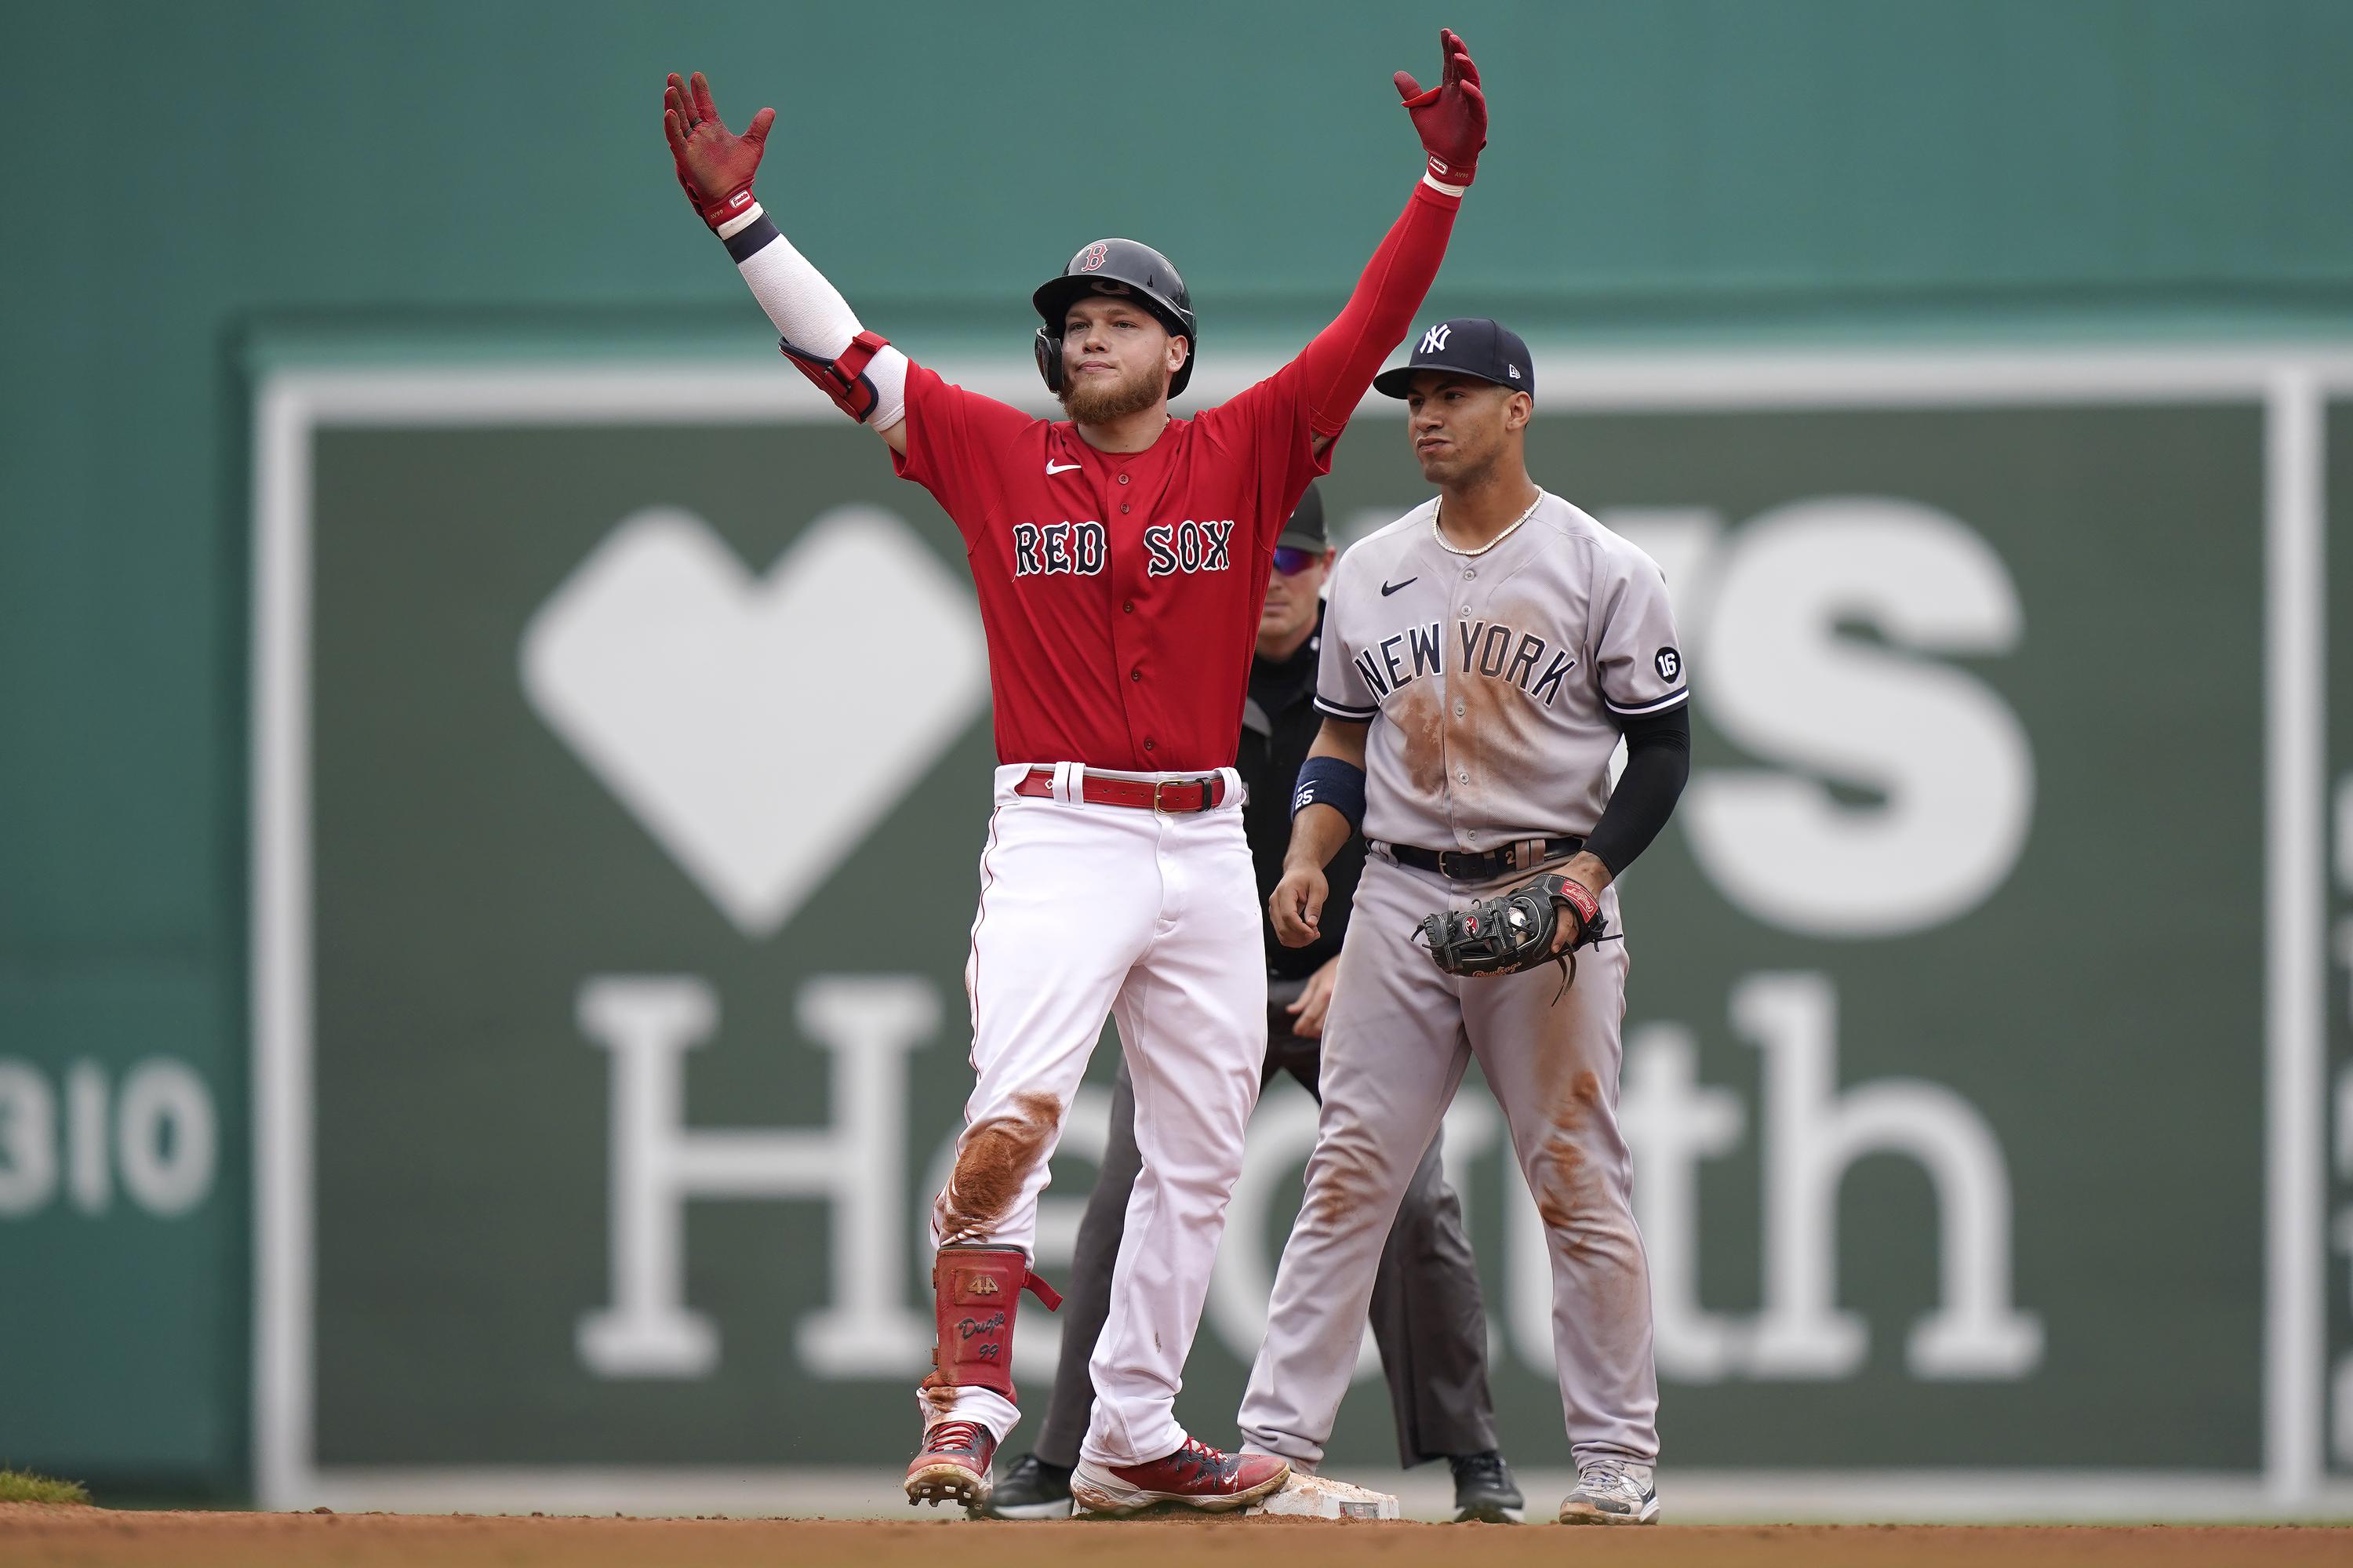 Red Sox score 5 runs in 8th inning, rally past Yankees 54